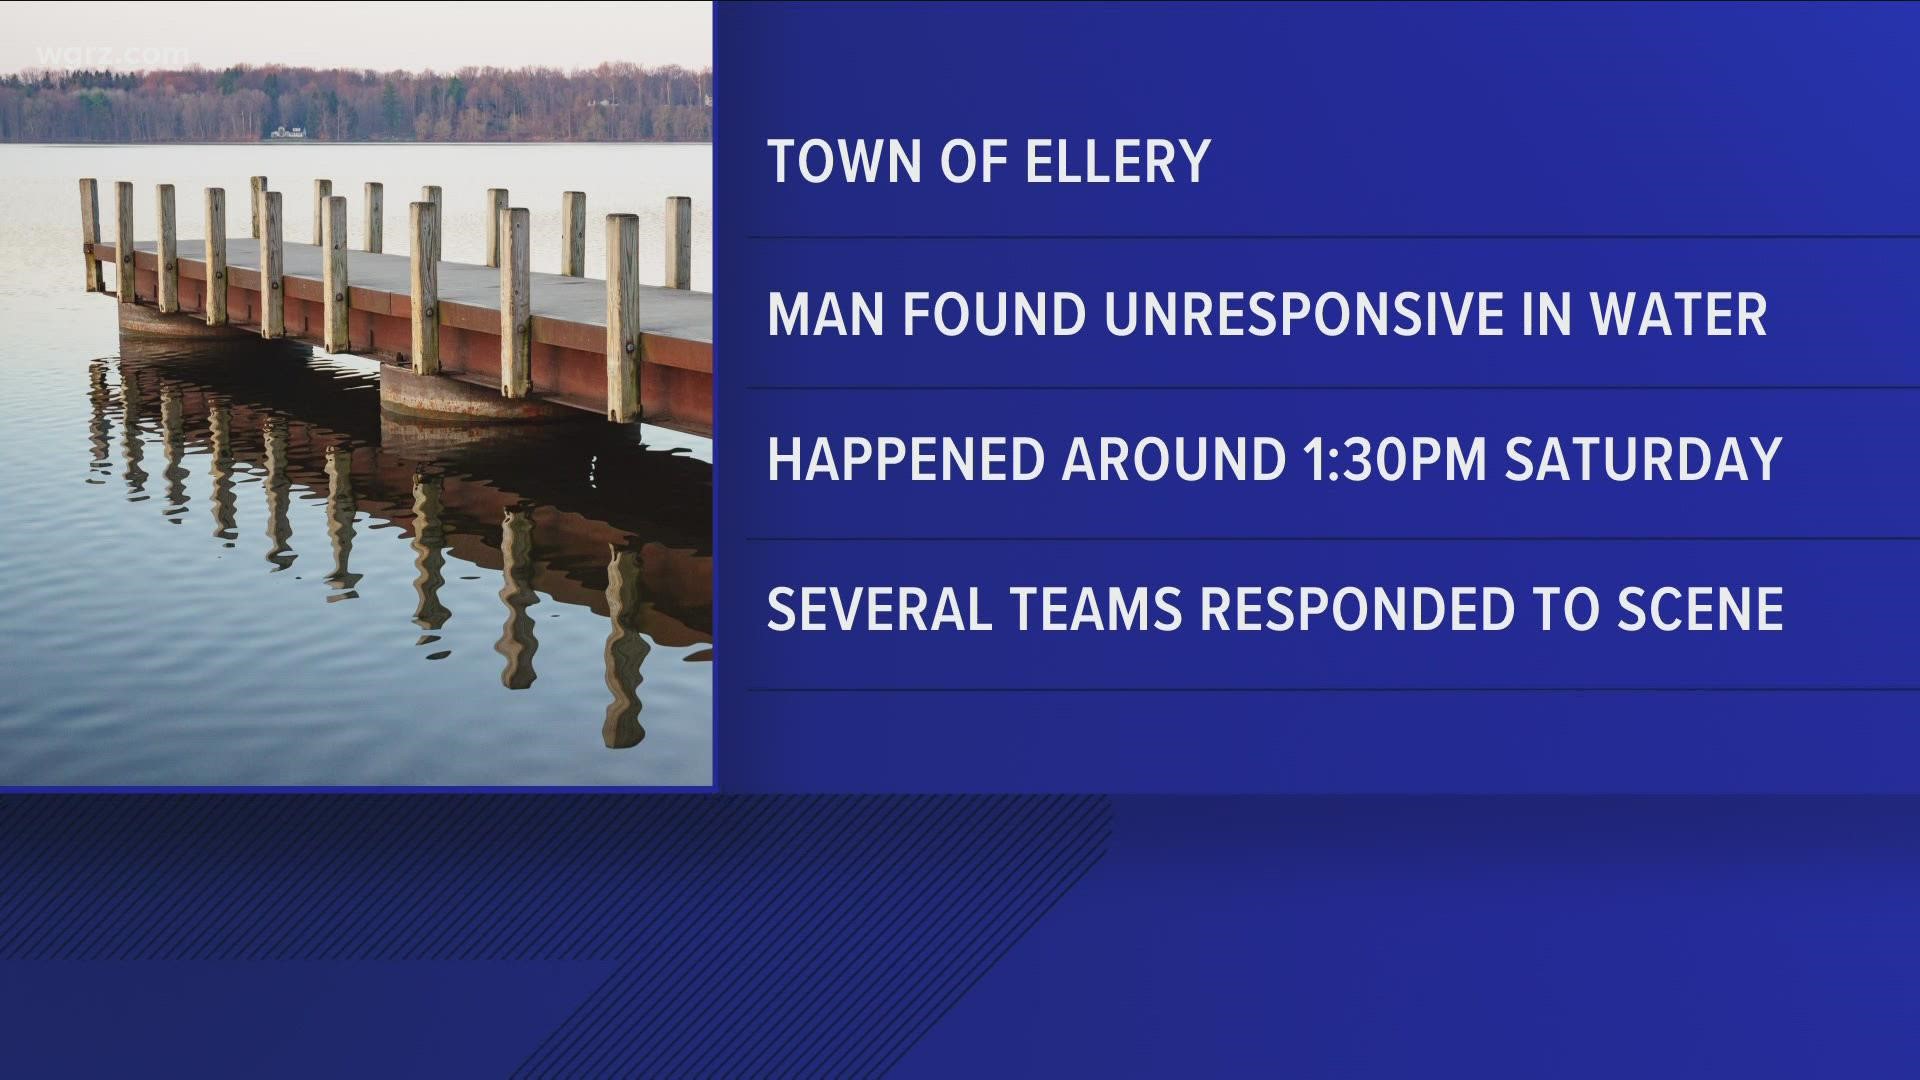 The Chautauqua County Sheriff's Office says several teams responded to the scene, but the man was found unresponsive in the water.